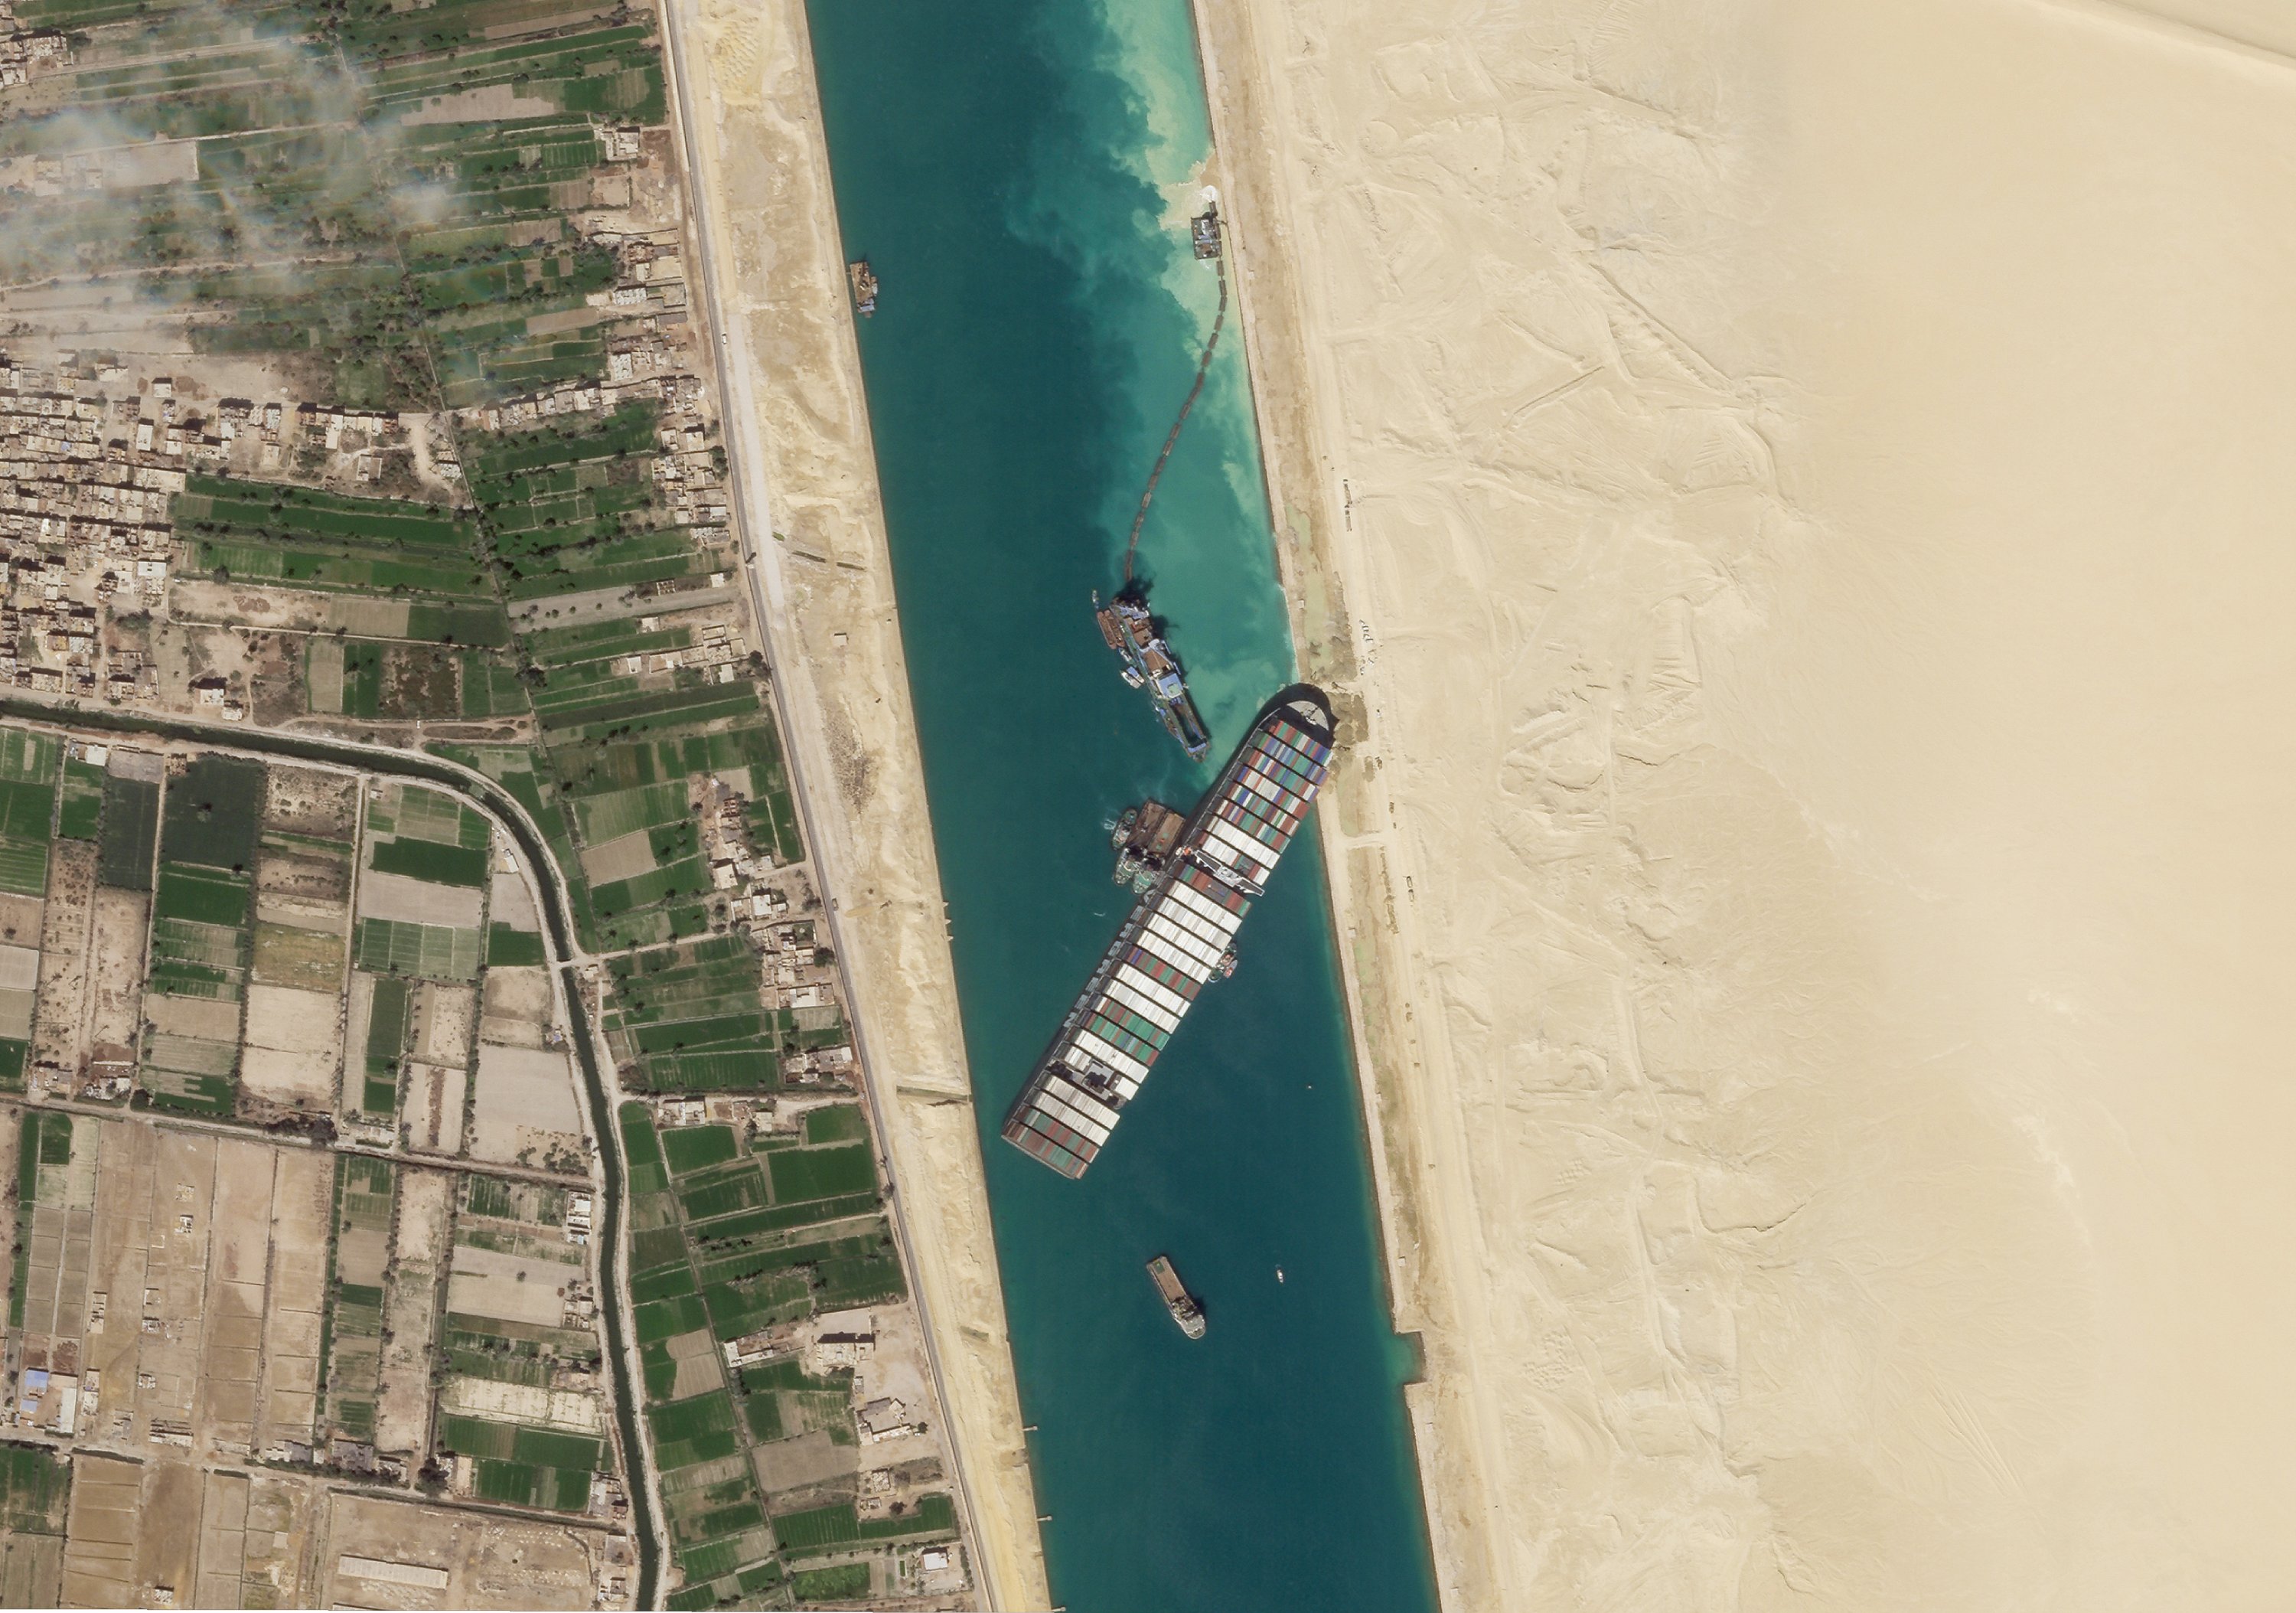 Giant container ship stuck in Suez Canal partially refloated in 1st step to unblock one of world’s busiest waterways